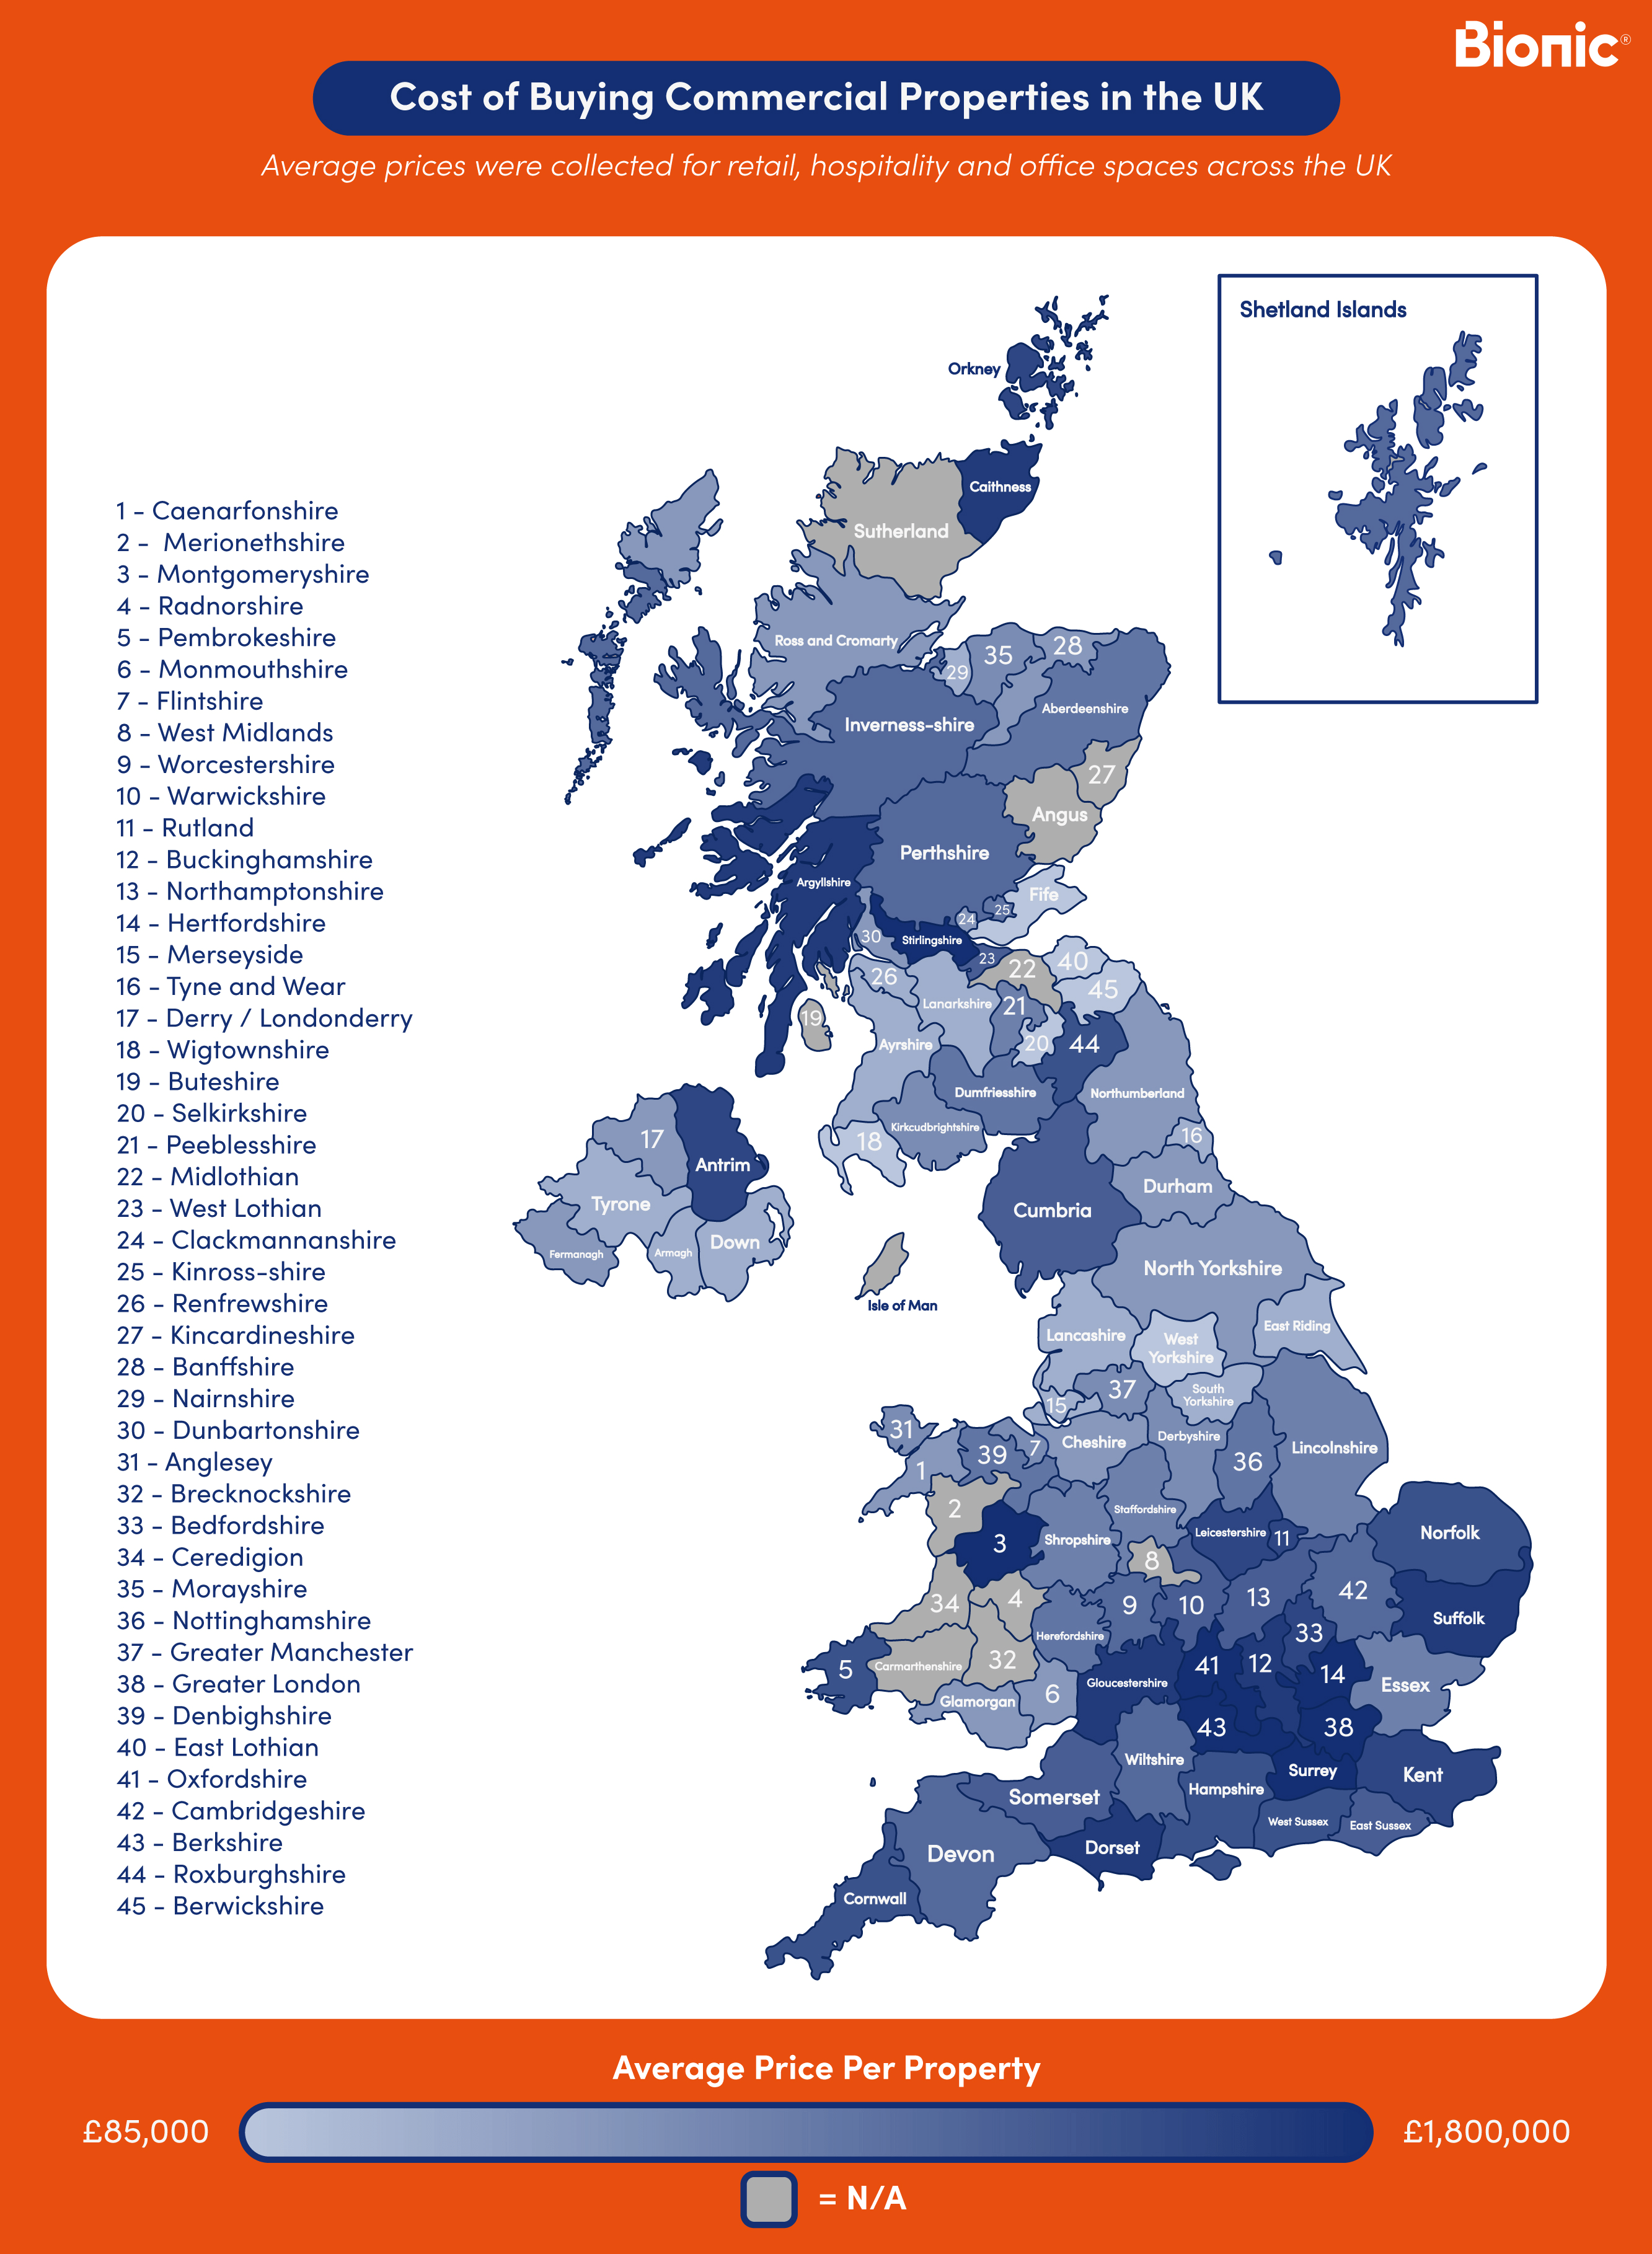 UK map split into regions to show how expensive it is to buy a commercial property in each